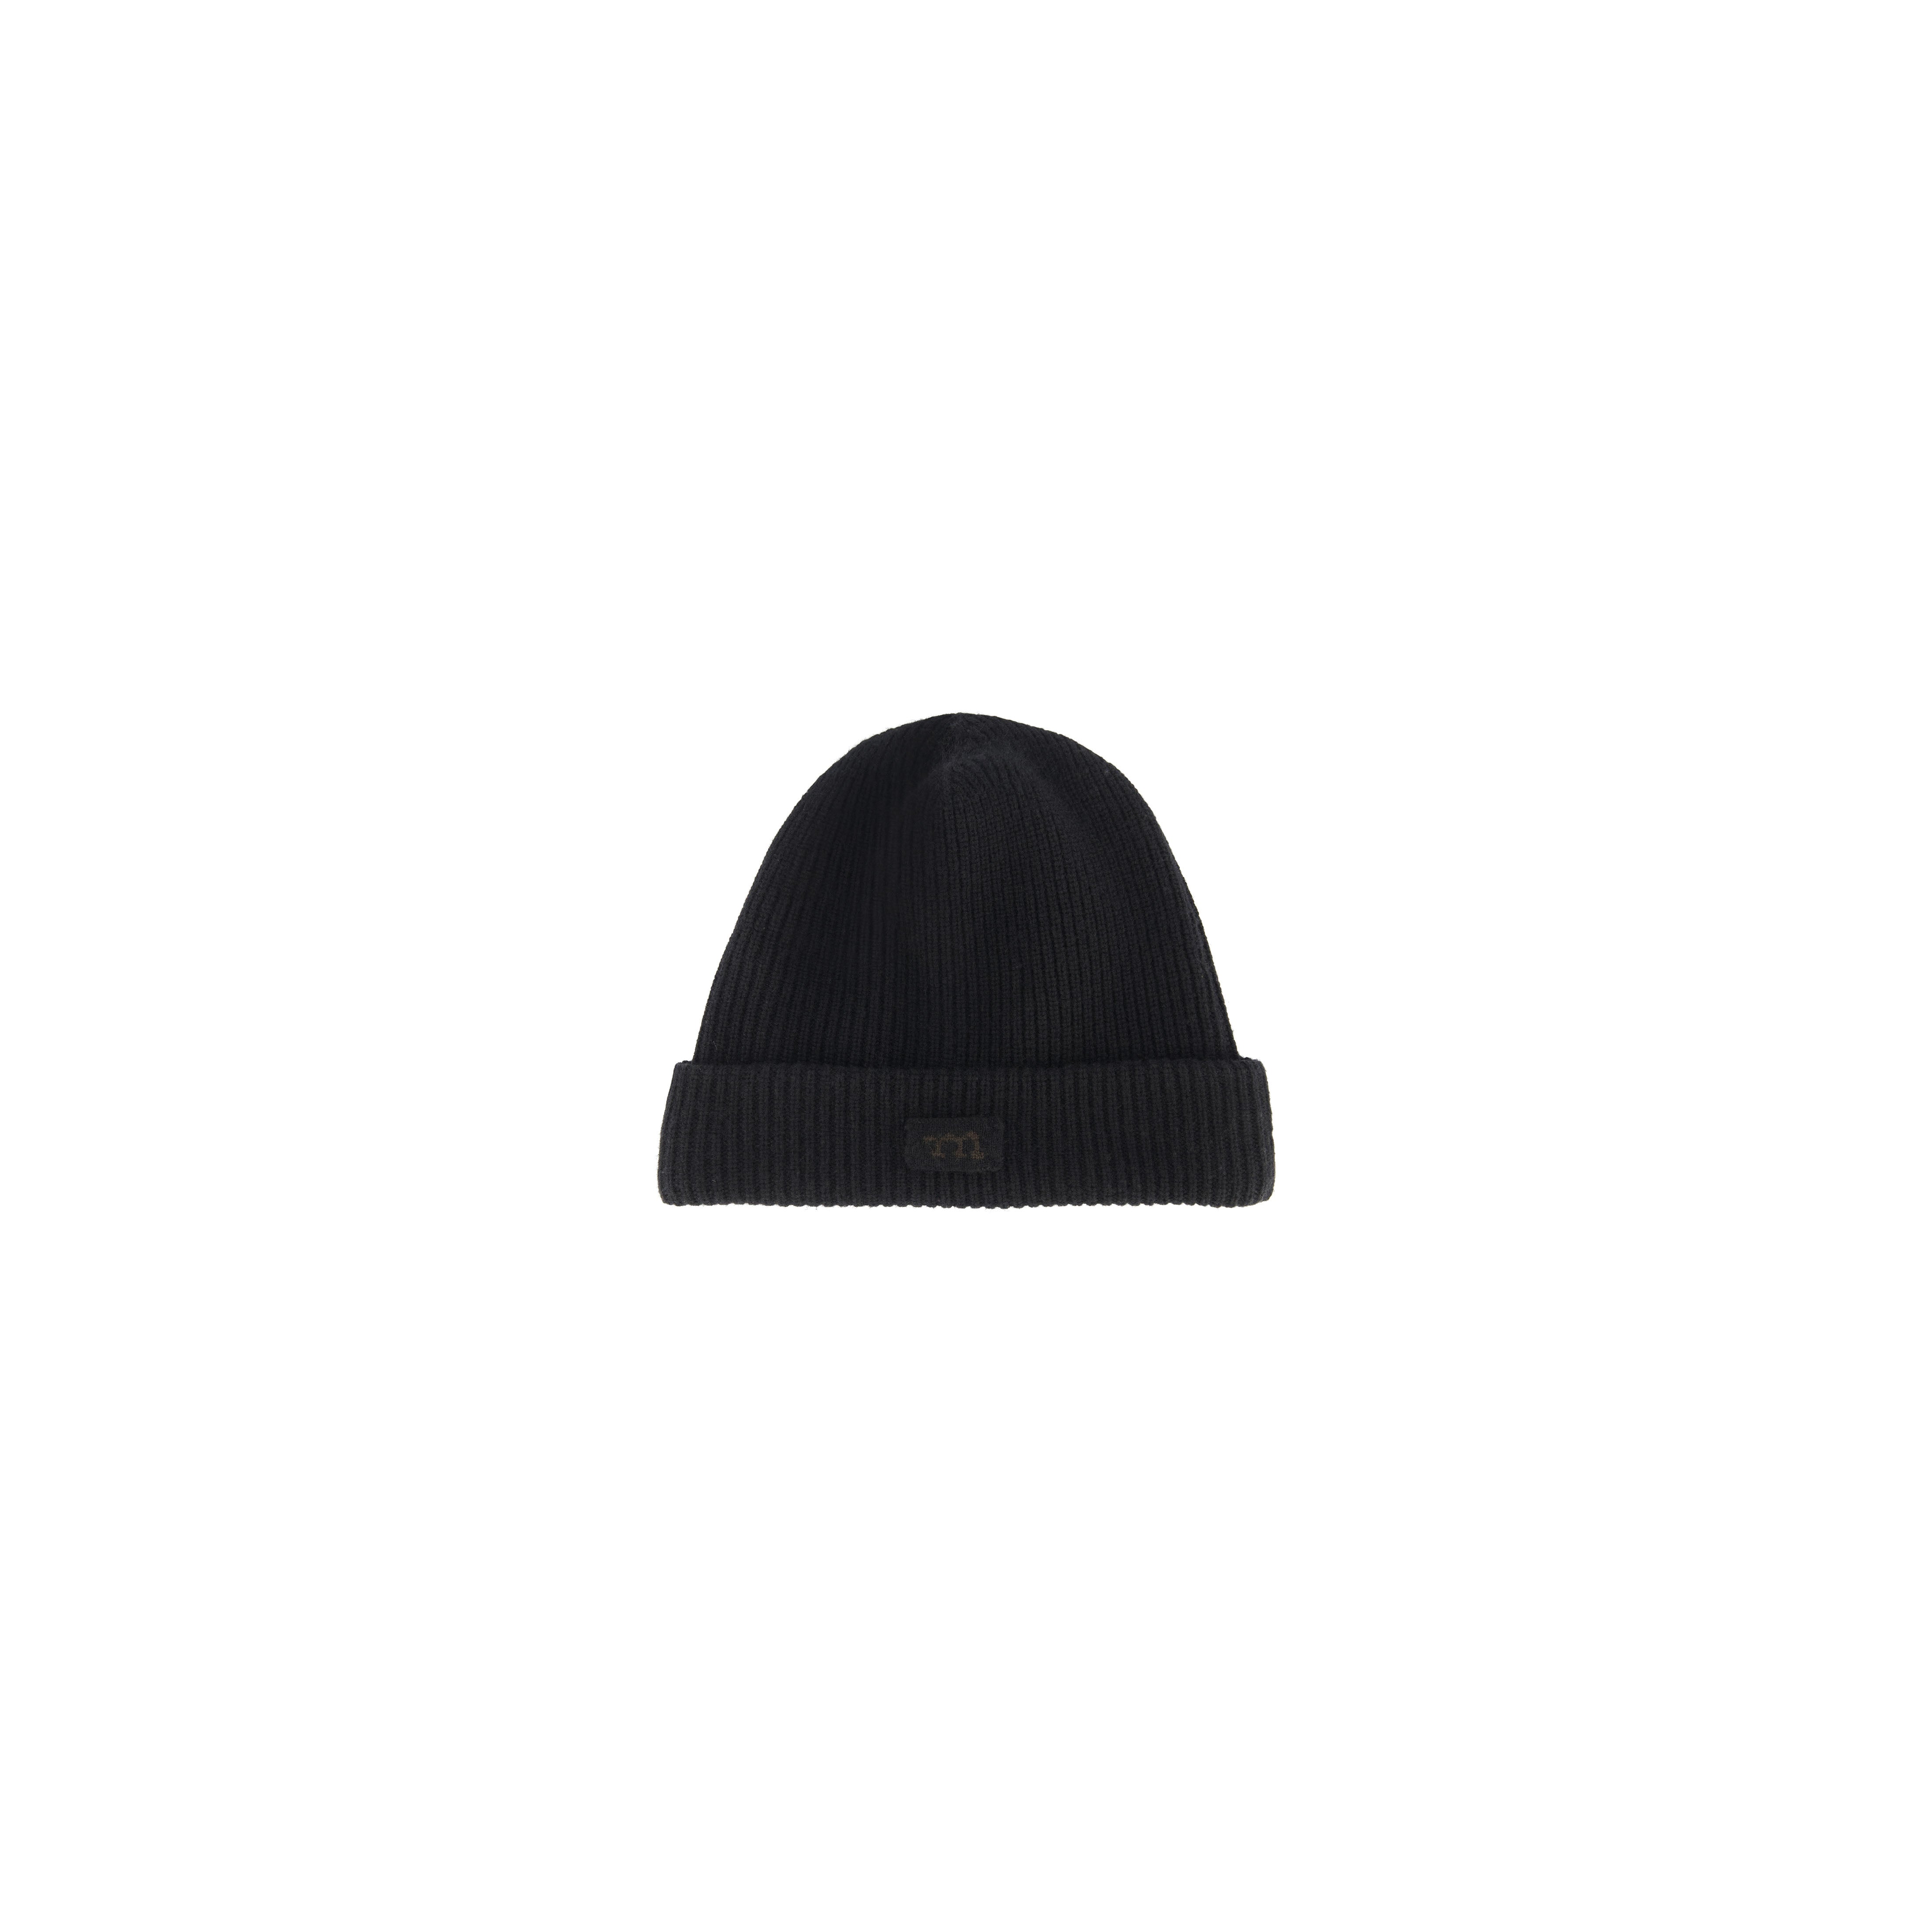 Louis Vuitton LV Cold Spark Beanie Black Cashmere Knitted